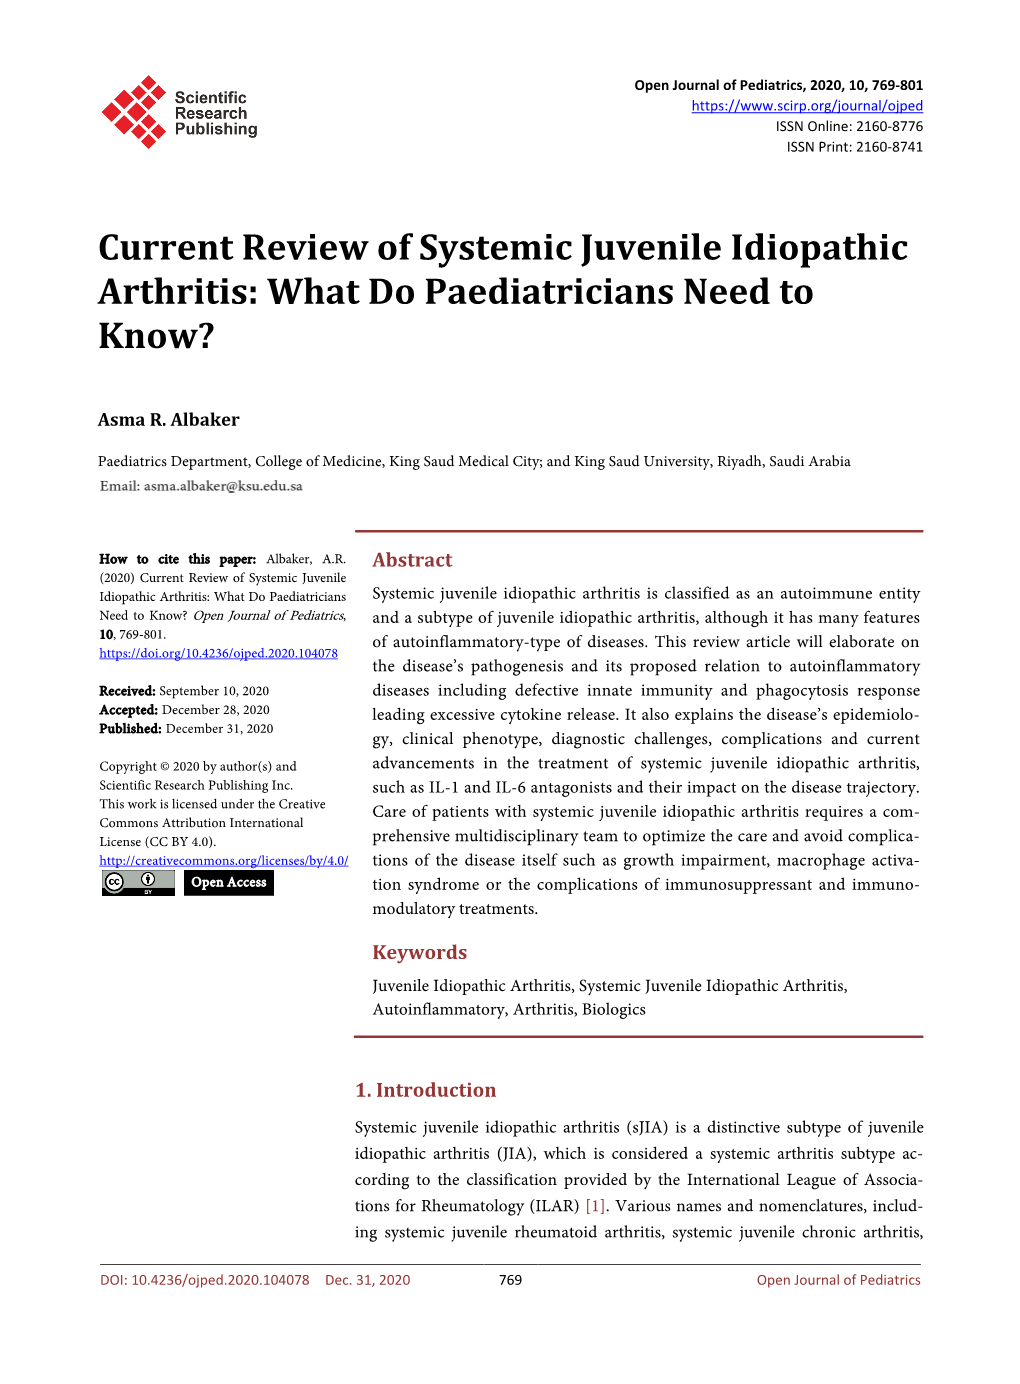 Current Review of Systemic Juvenile Idiopathic Arthritis: What Do Paediatricians Need to Know?